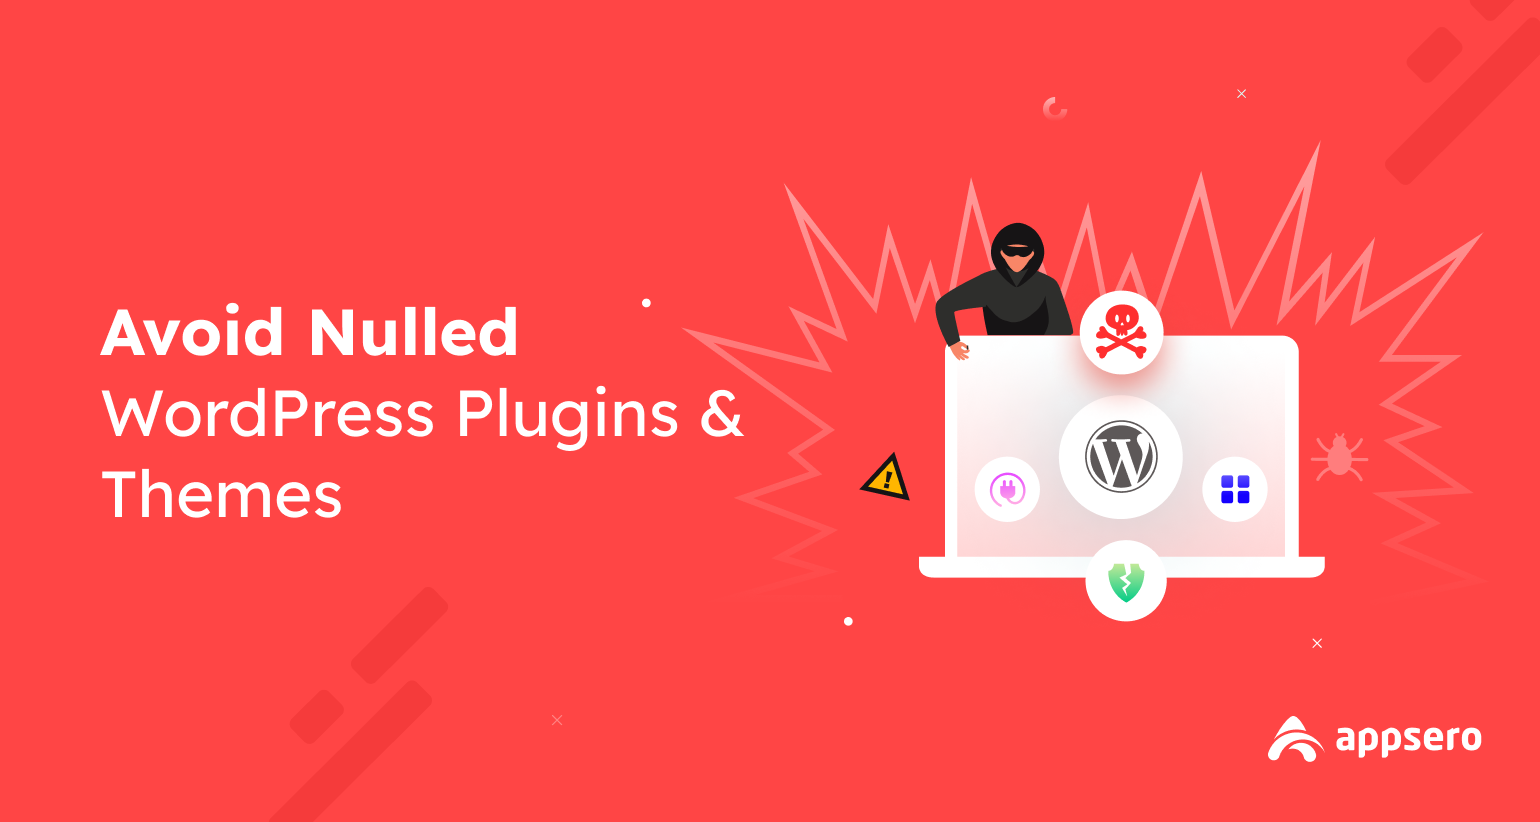 Why You Should Avoid Nulled WordPress Plugins & Themes - 9 Valid Reasons 1